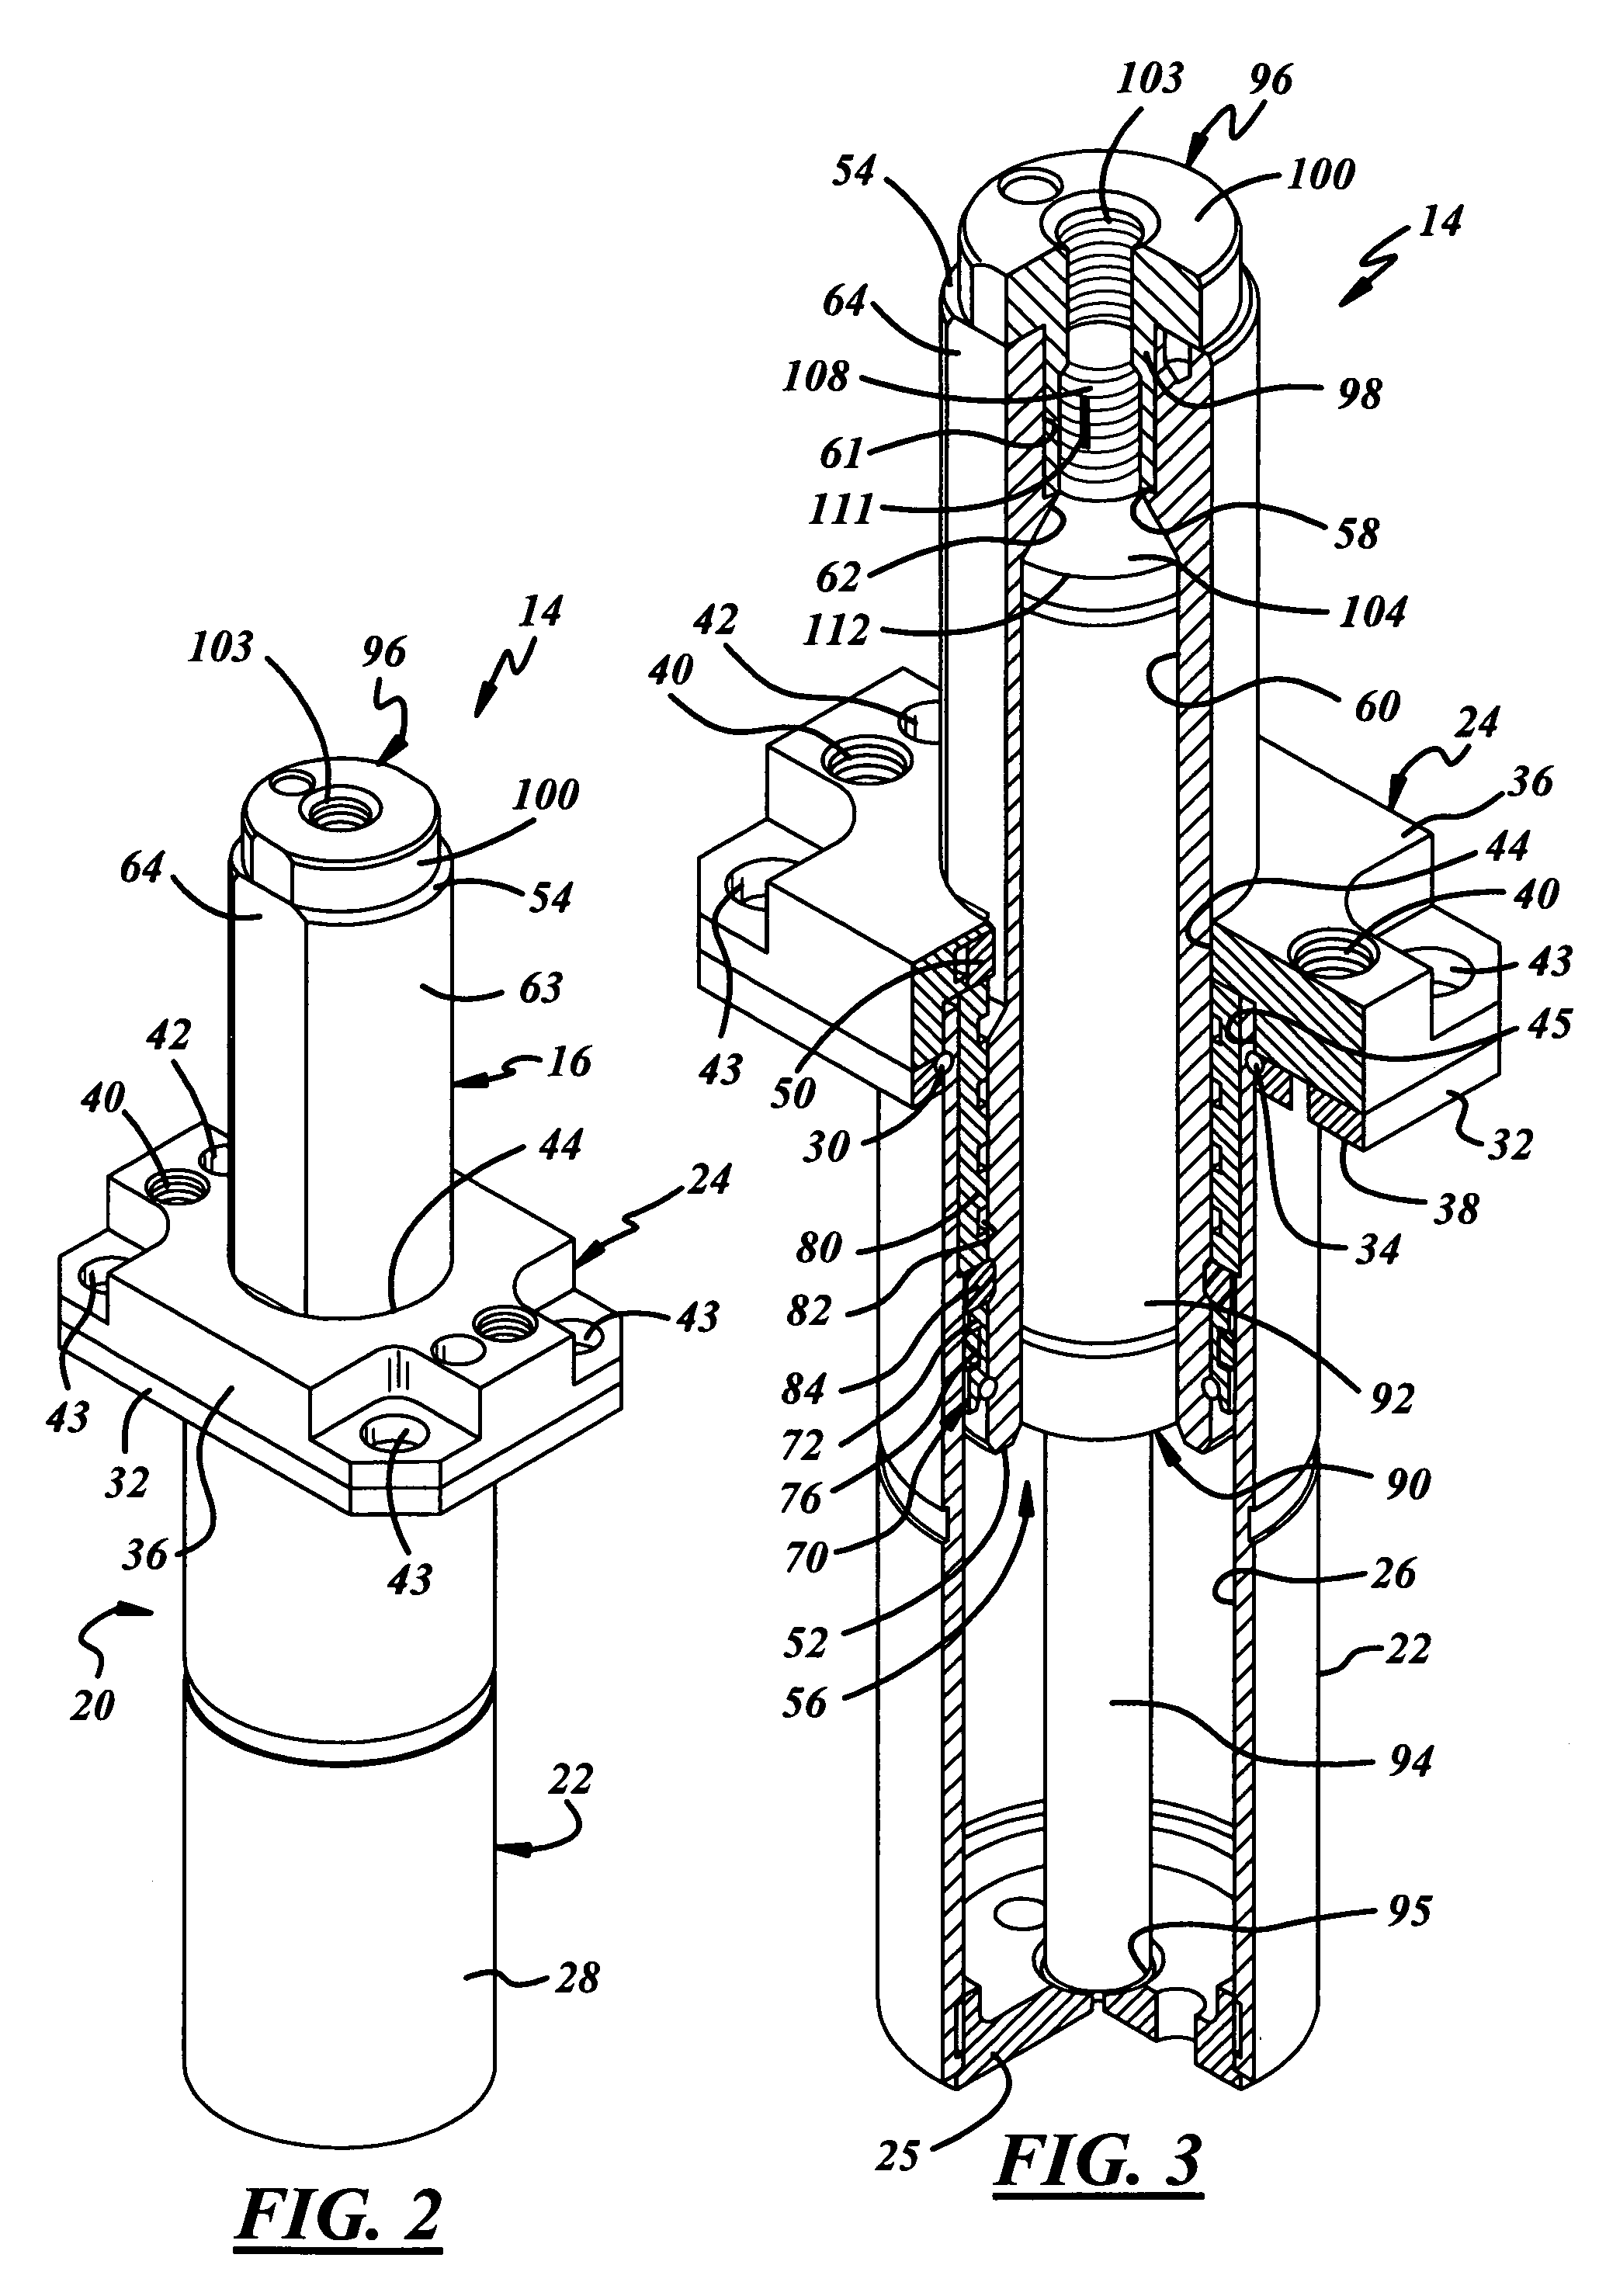 Reaction device for forming equipment